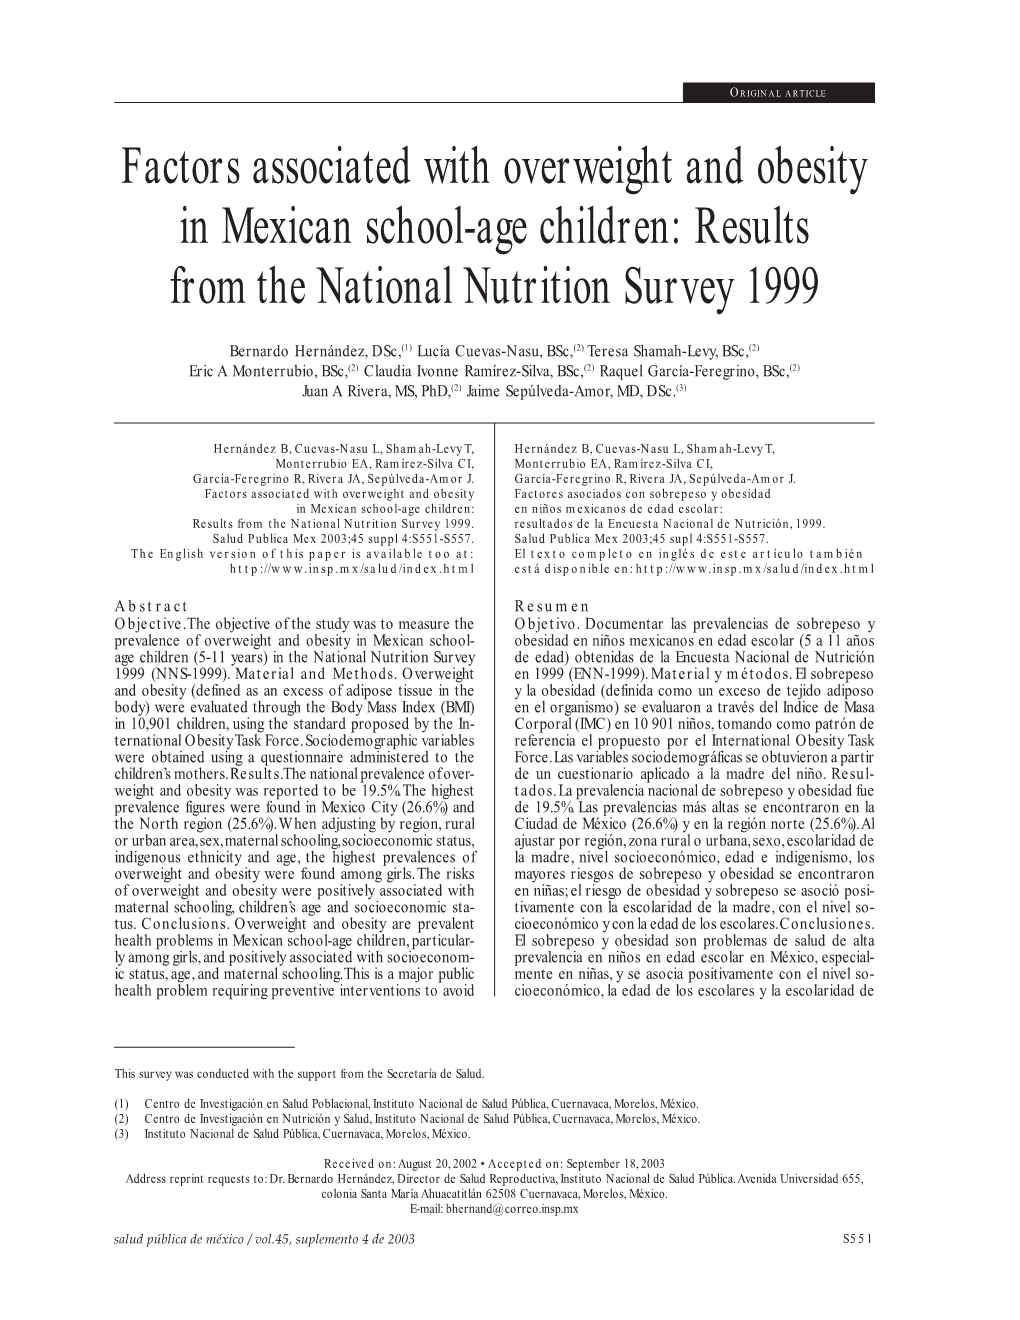 Factors Associated with Overweight and Obesity in Mexican School-Age Children: Results from the National Nutrition Survey 1999